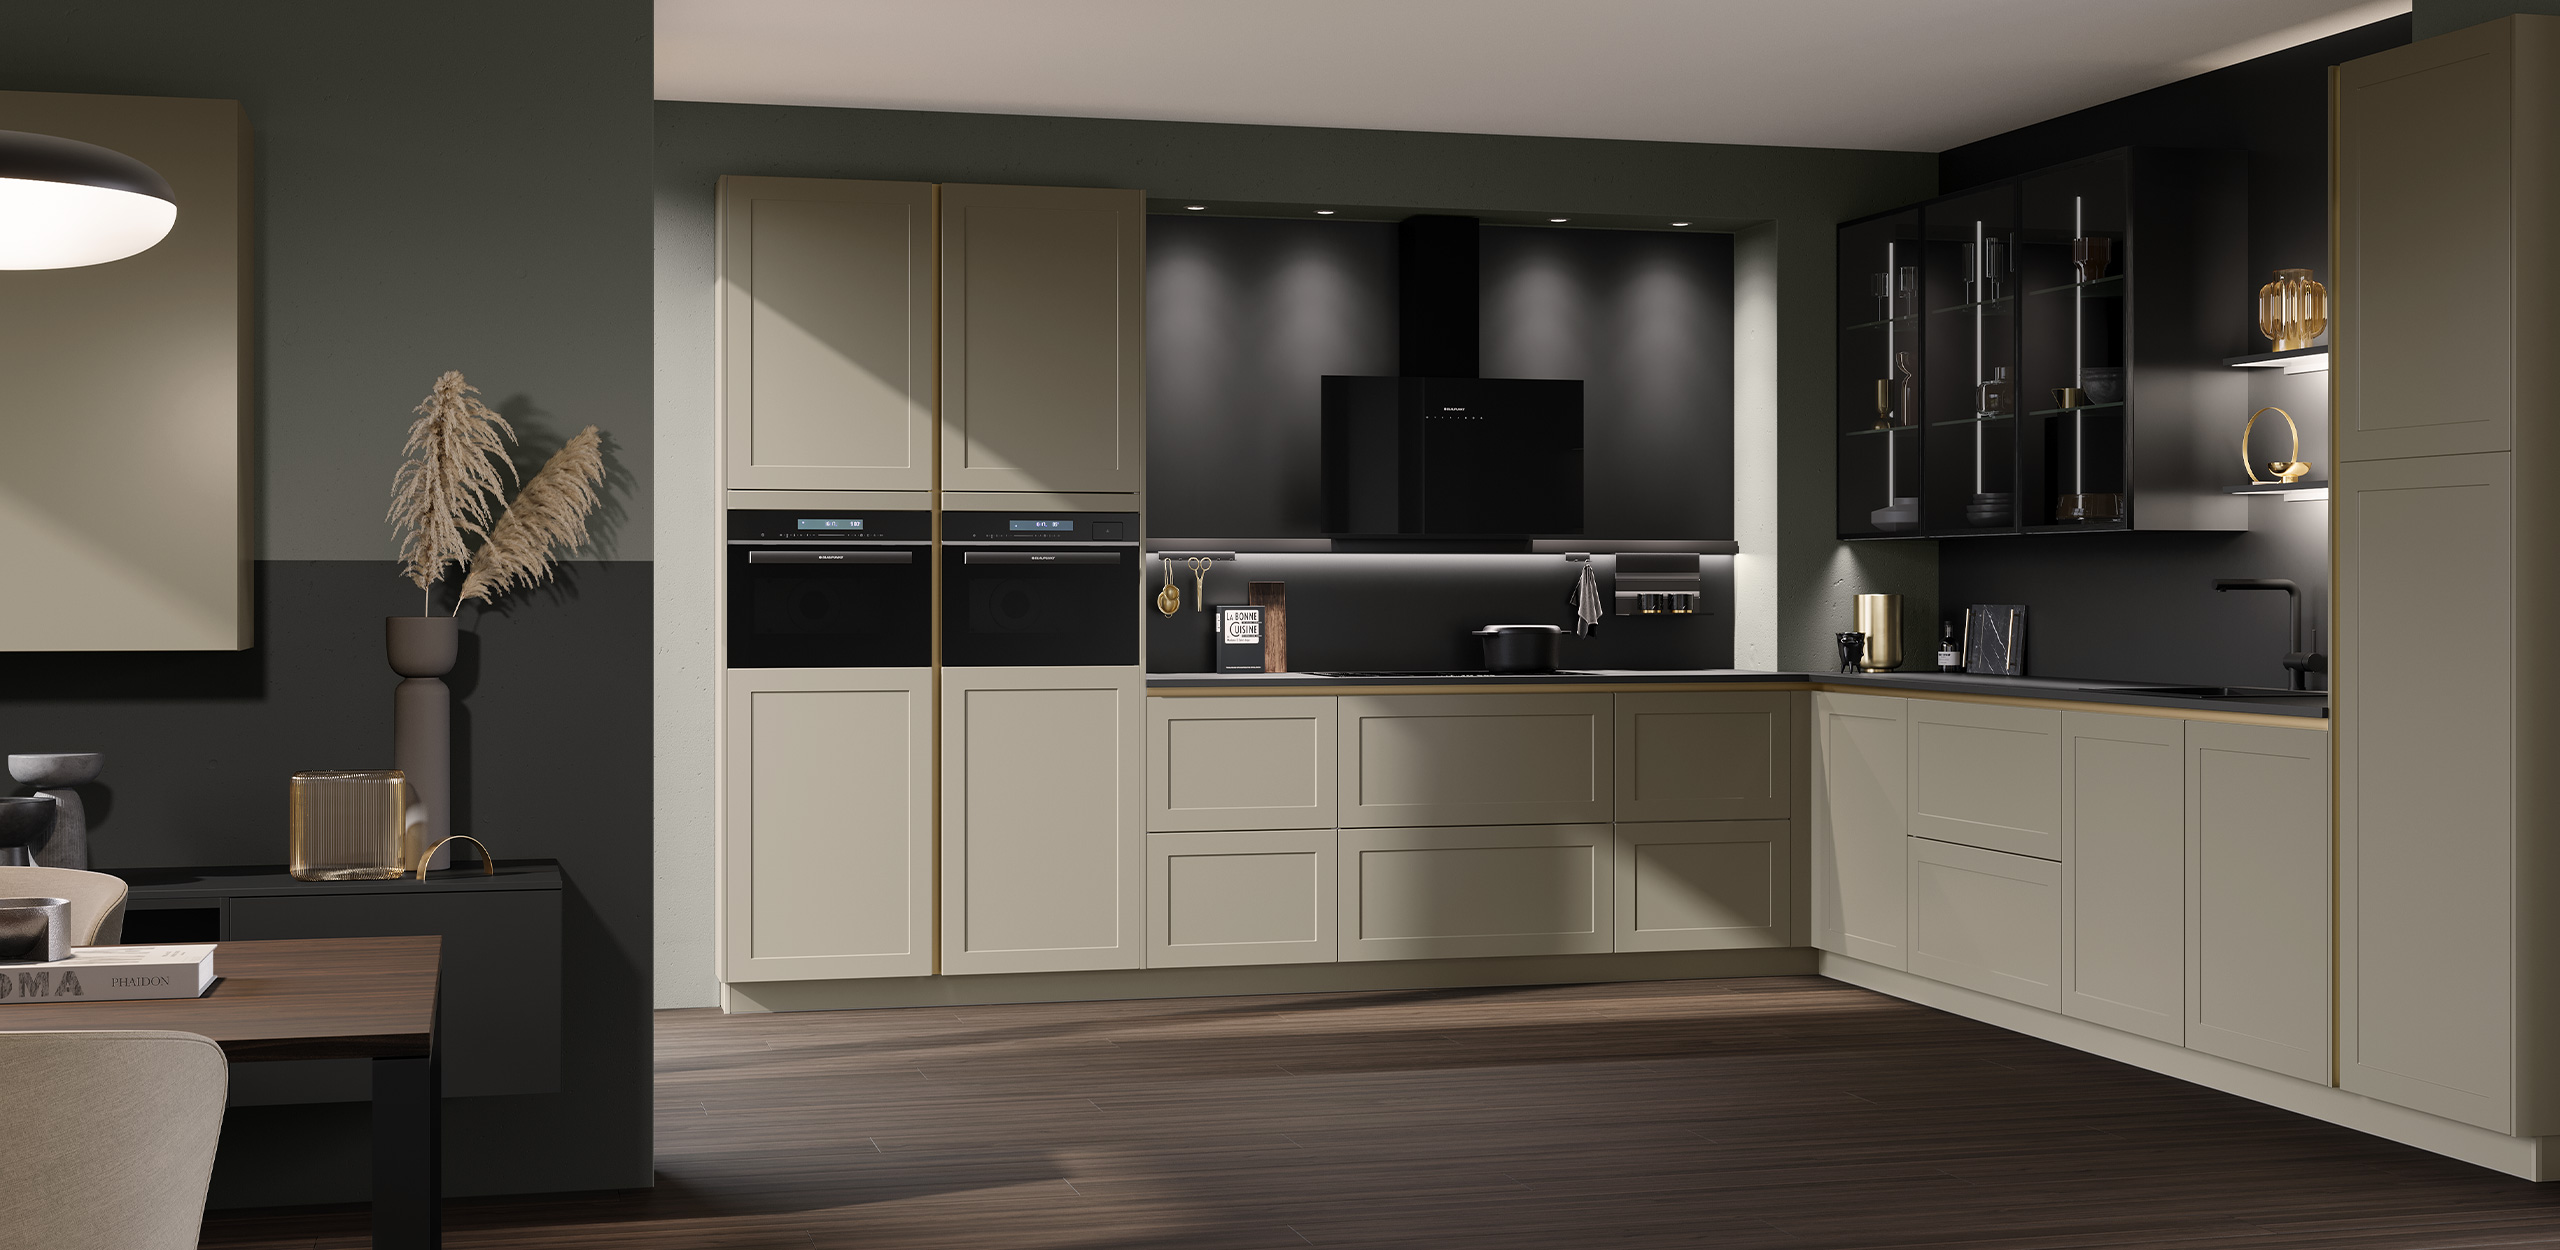 General view of the kitchen ensemble with fronts in natural umber, glass highlights and lighting effects